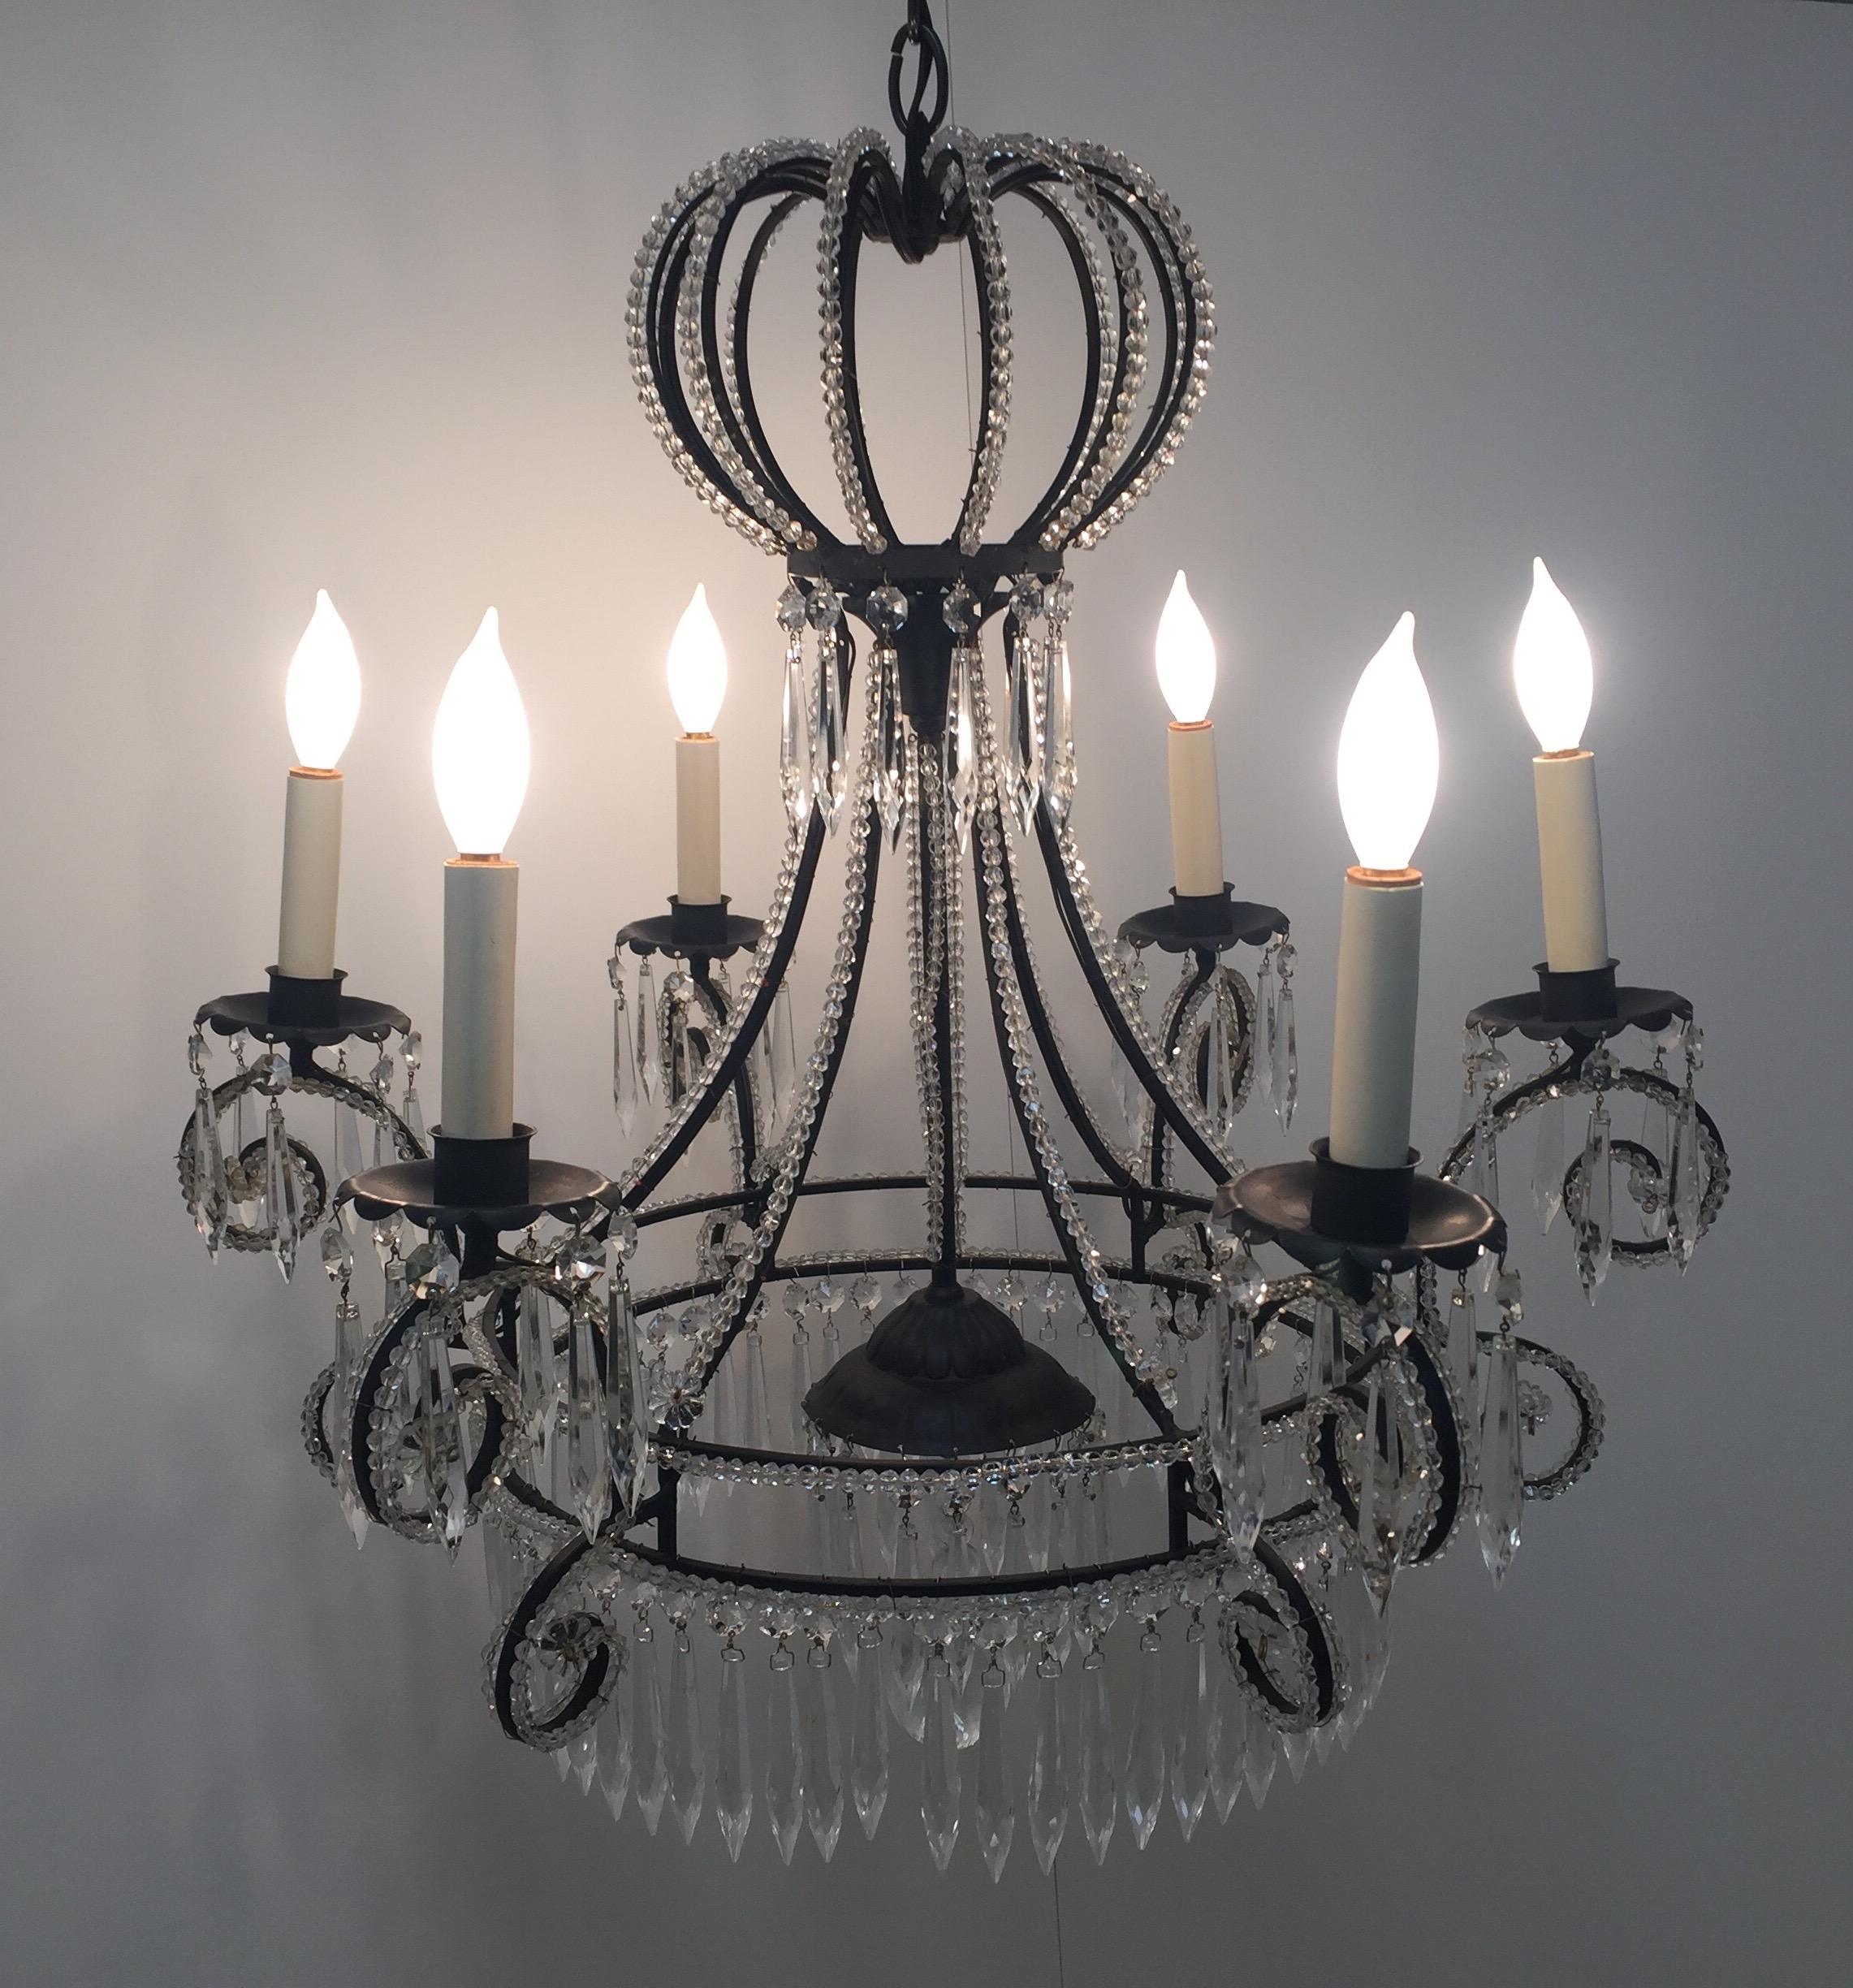 Wonderfully shaped French chandelier having black metal frame adorned with crystal beading, a crown shaped top, 6 arms, and 
artful placement of dripping crystals.
 